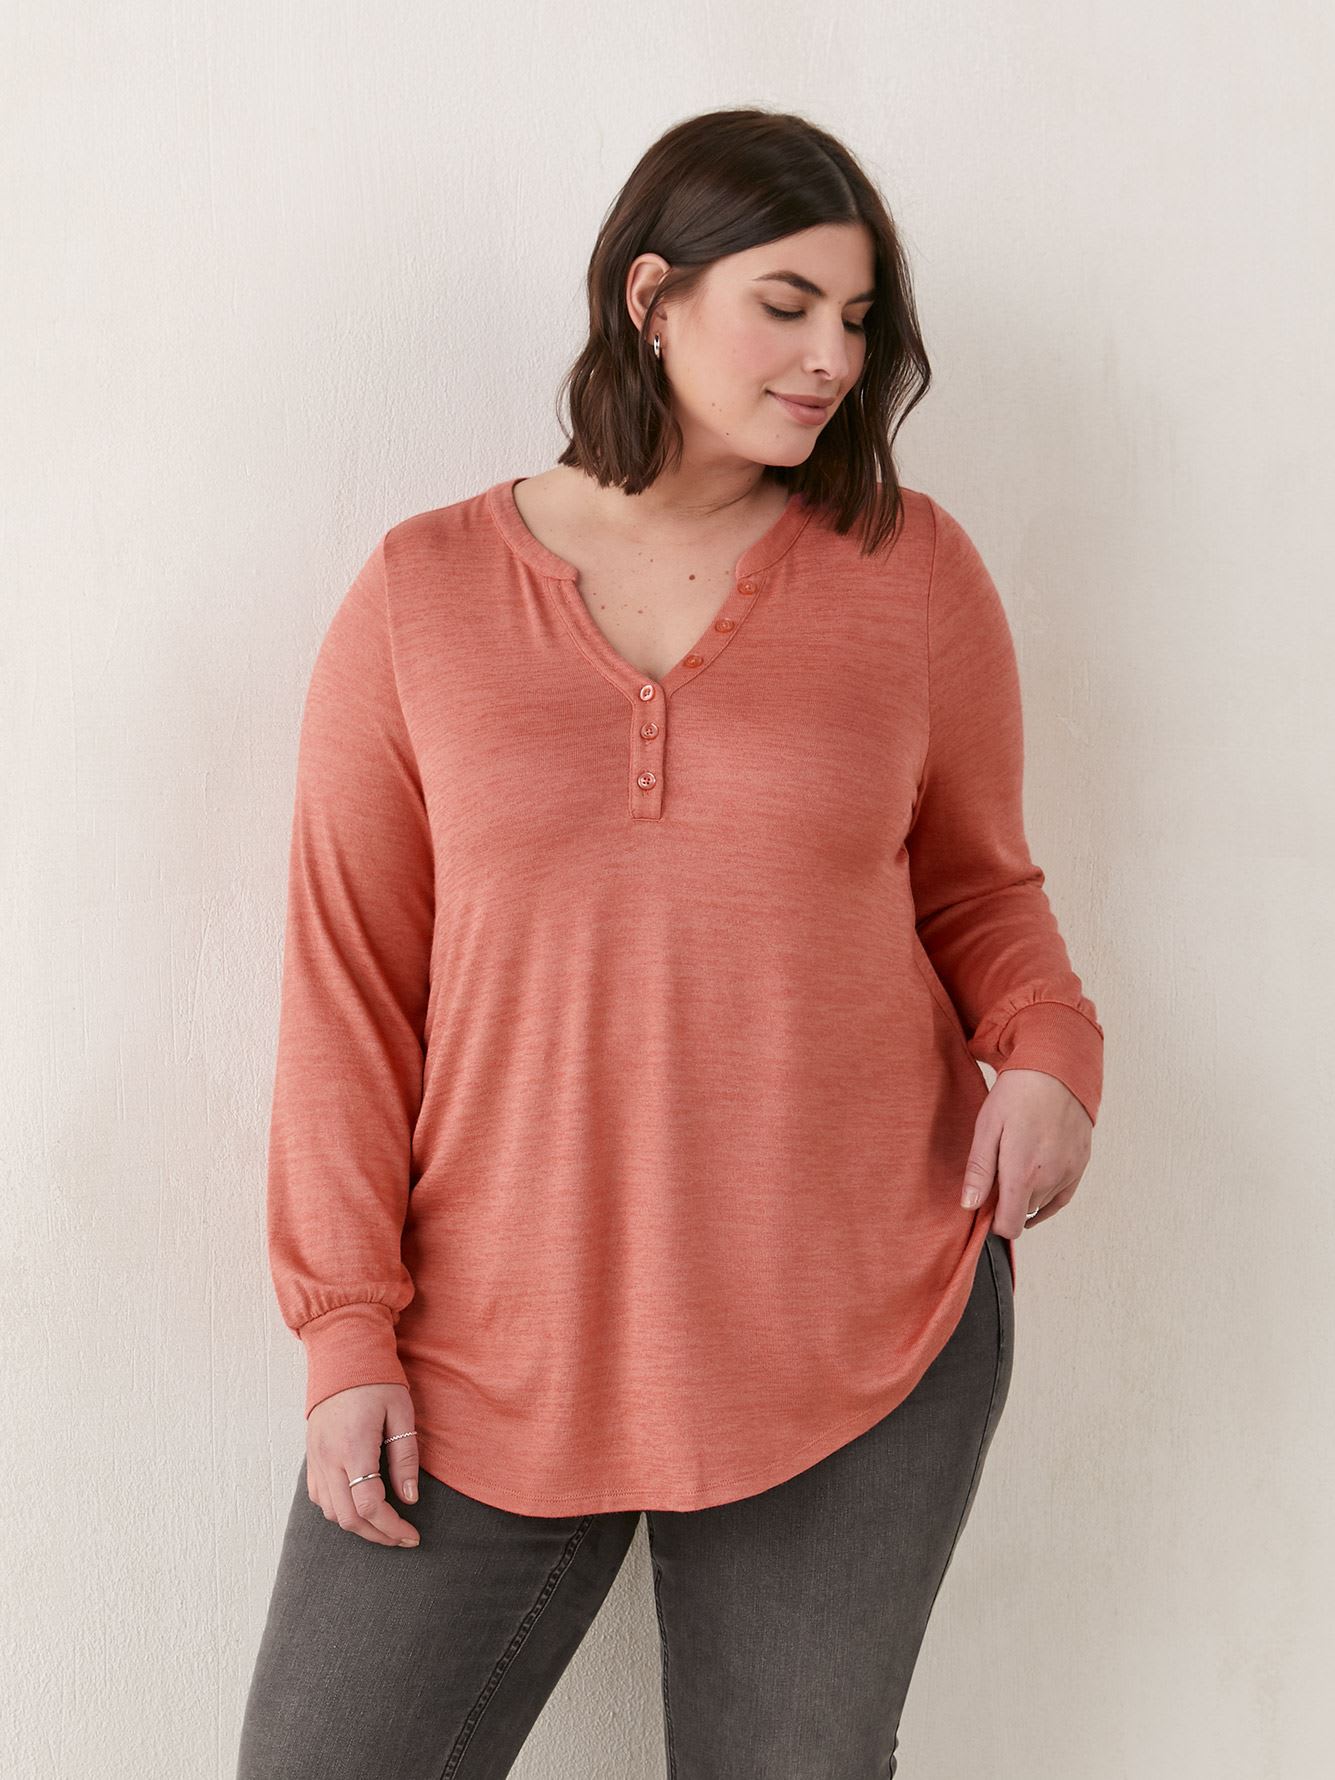 Long-Sleeve Top With Buttons - In Every Story